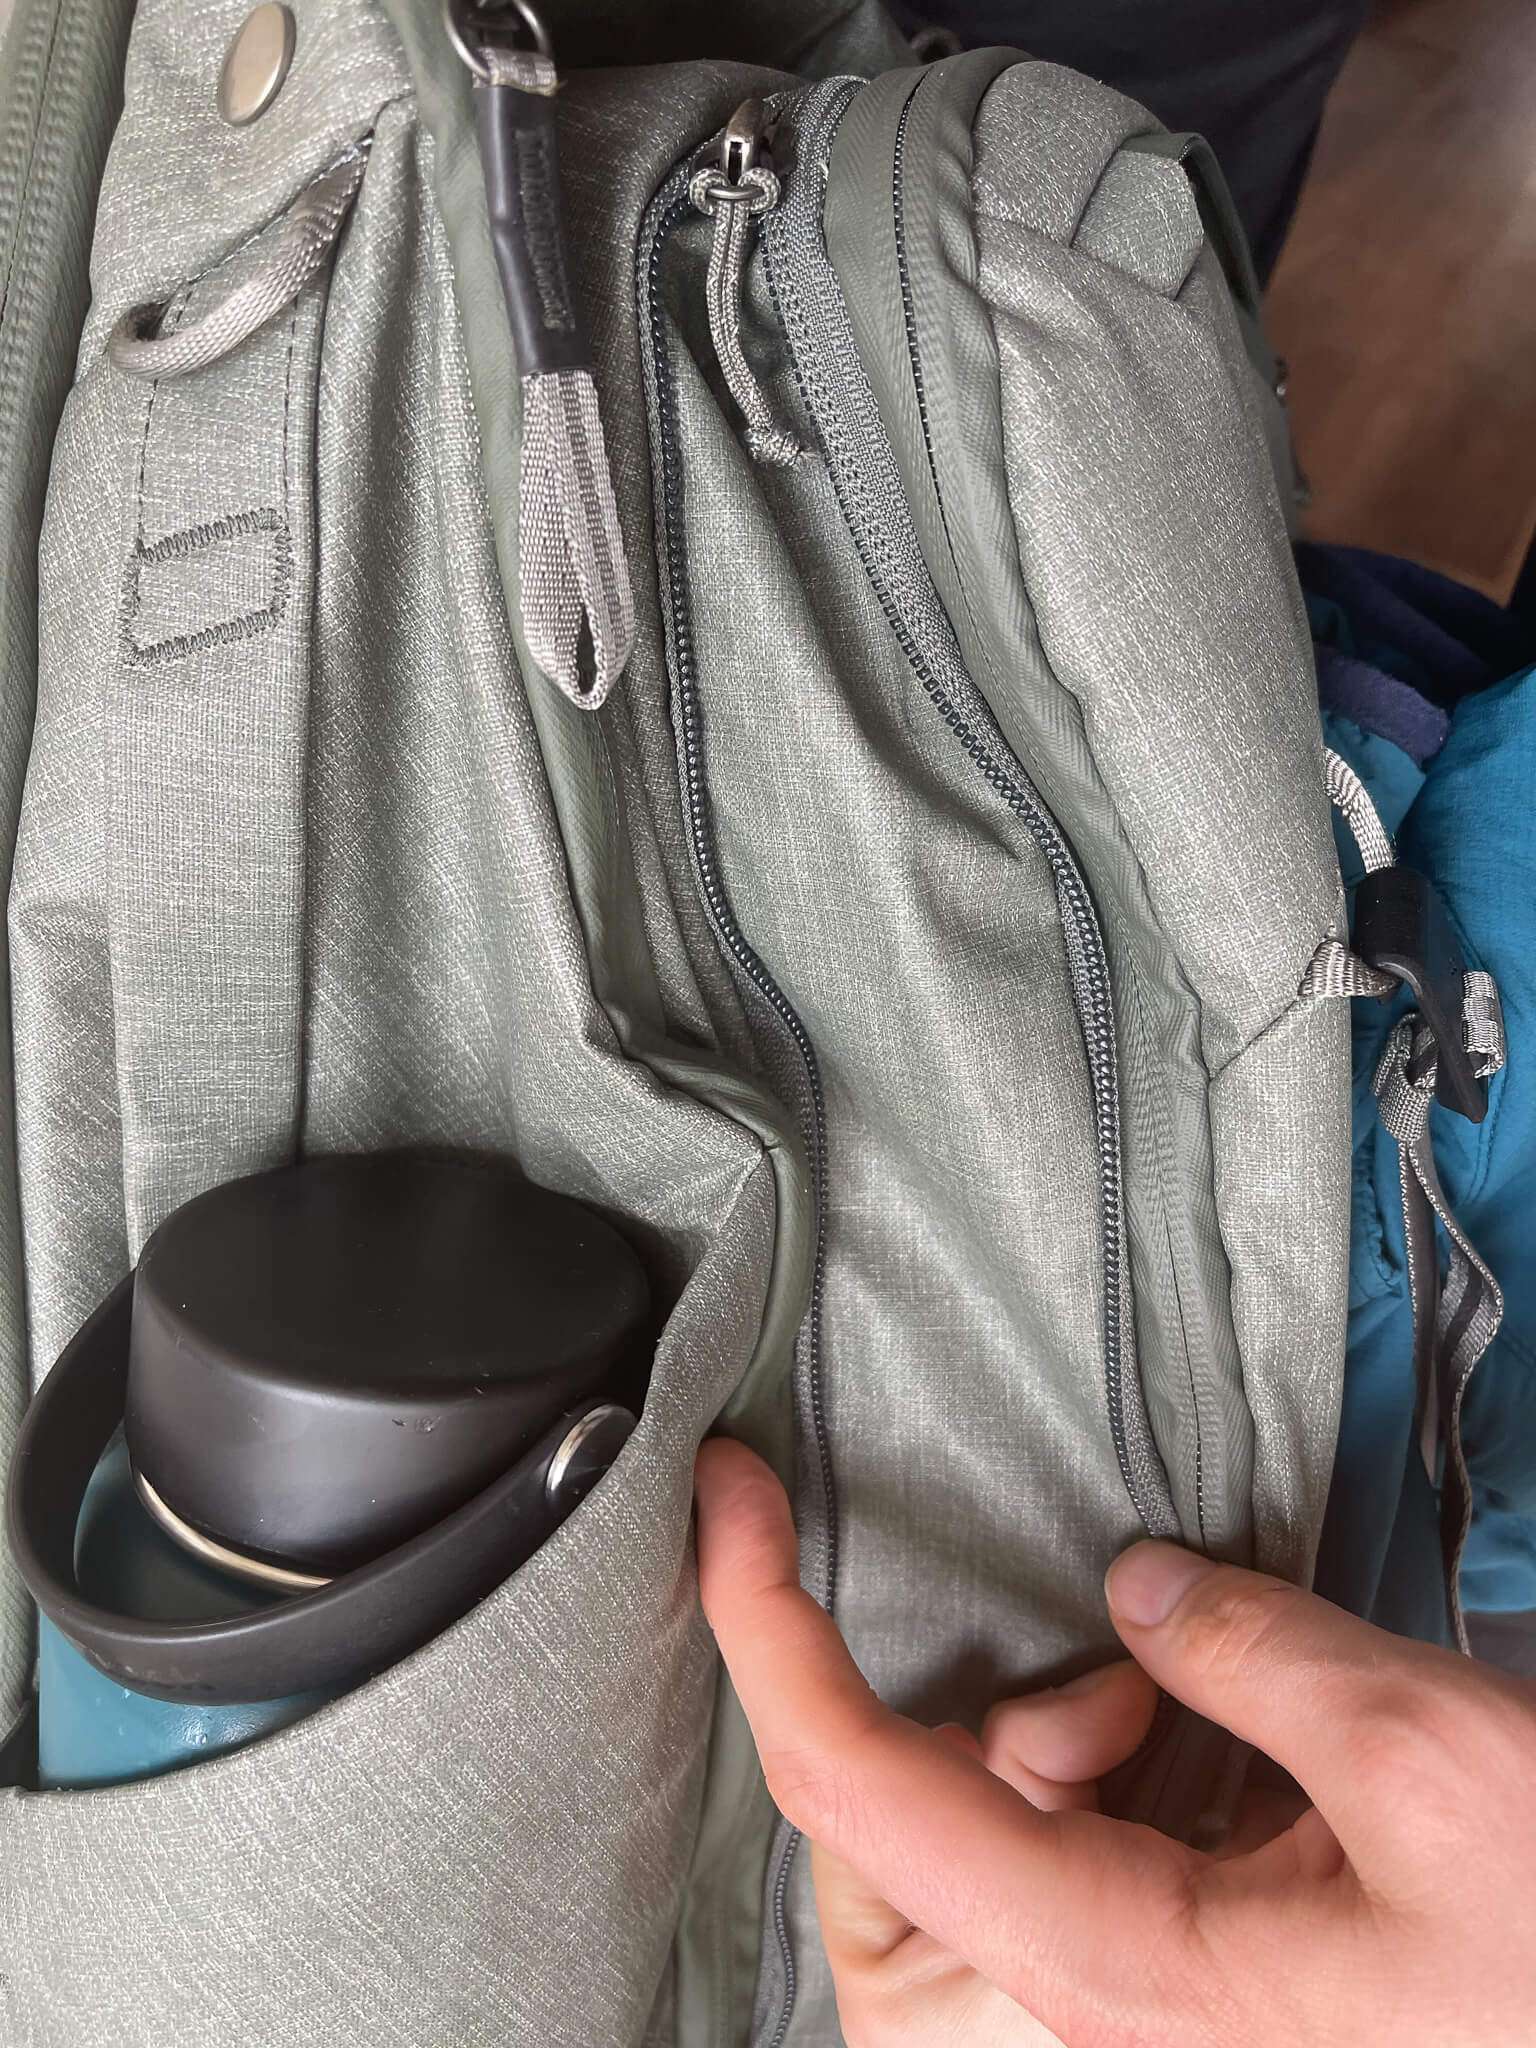 The Peak Design Travel Backpack is expandable up to 45L